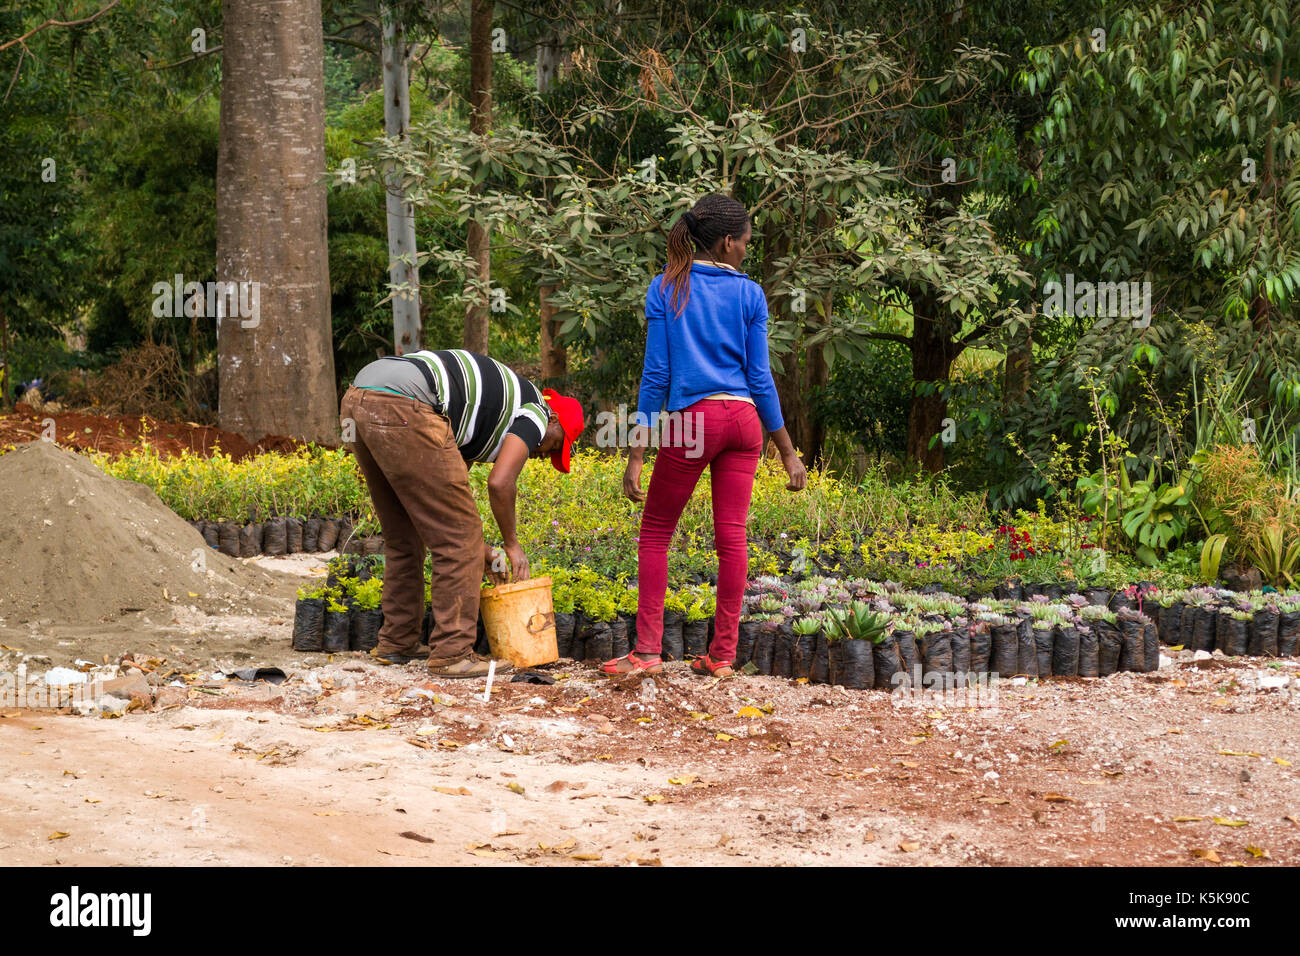 Two workers fill plants for sale in to plastic bags by road side, Nairobi, Kenya Stock Photo